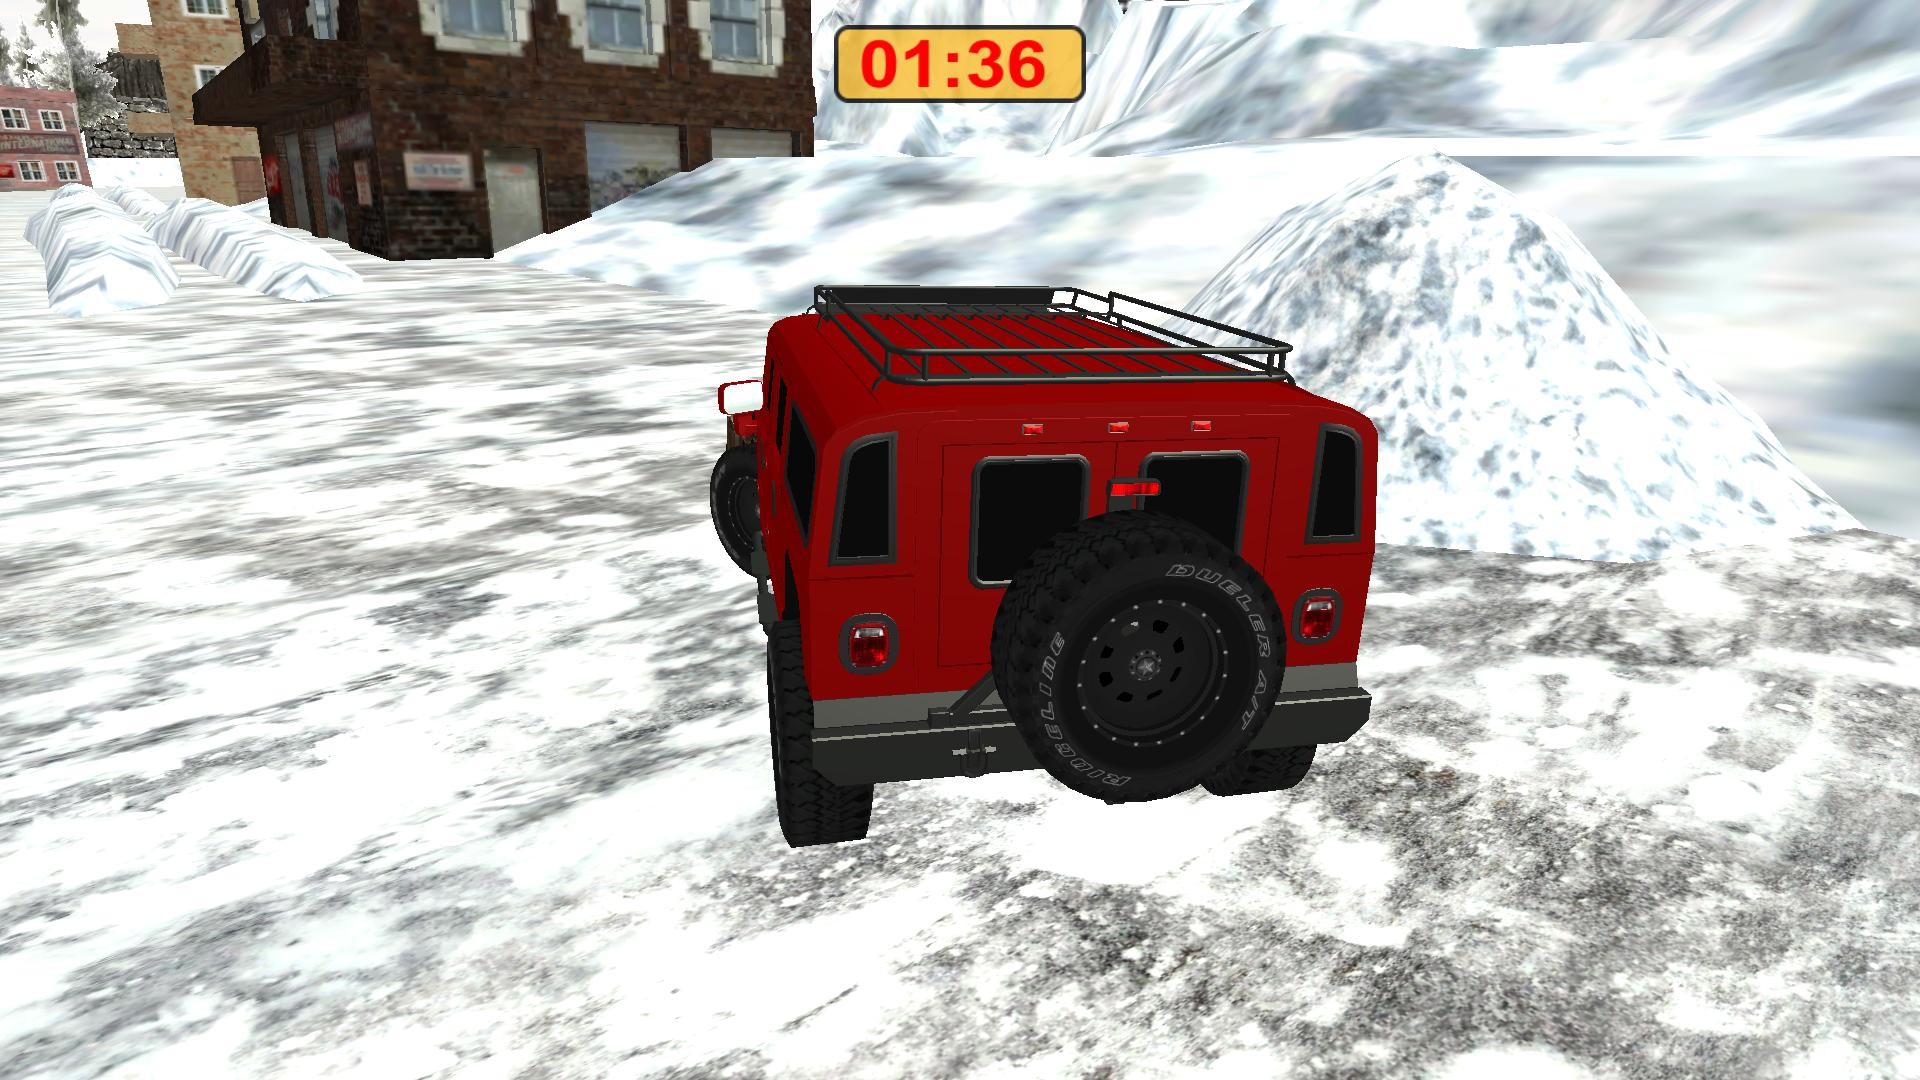 Snow Clearing Driving Simulator Steam CD Key 5.12 usd